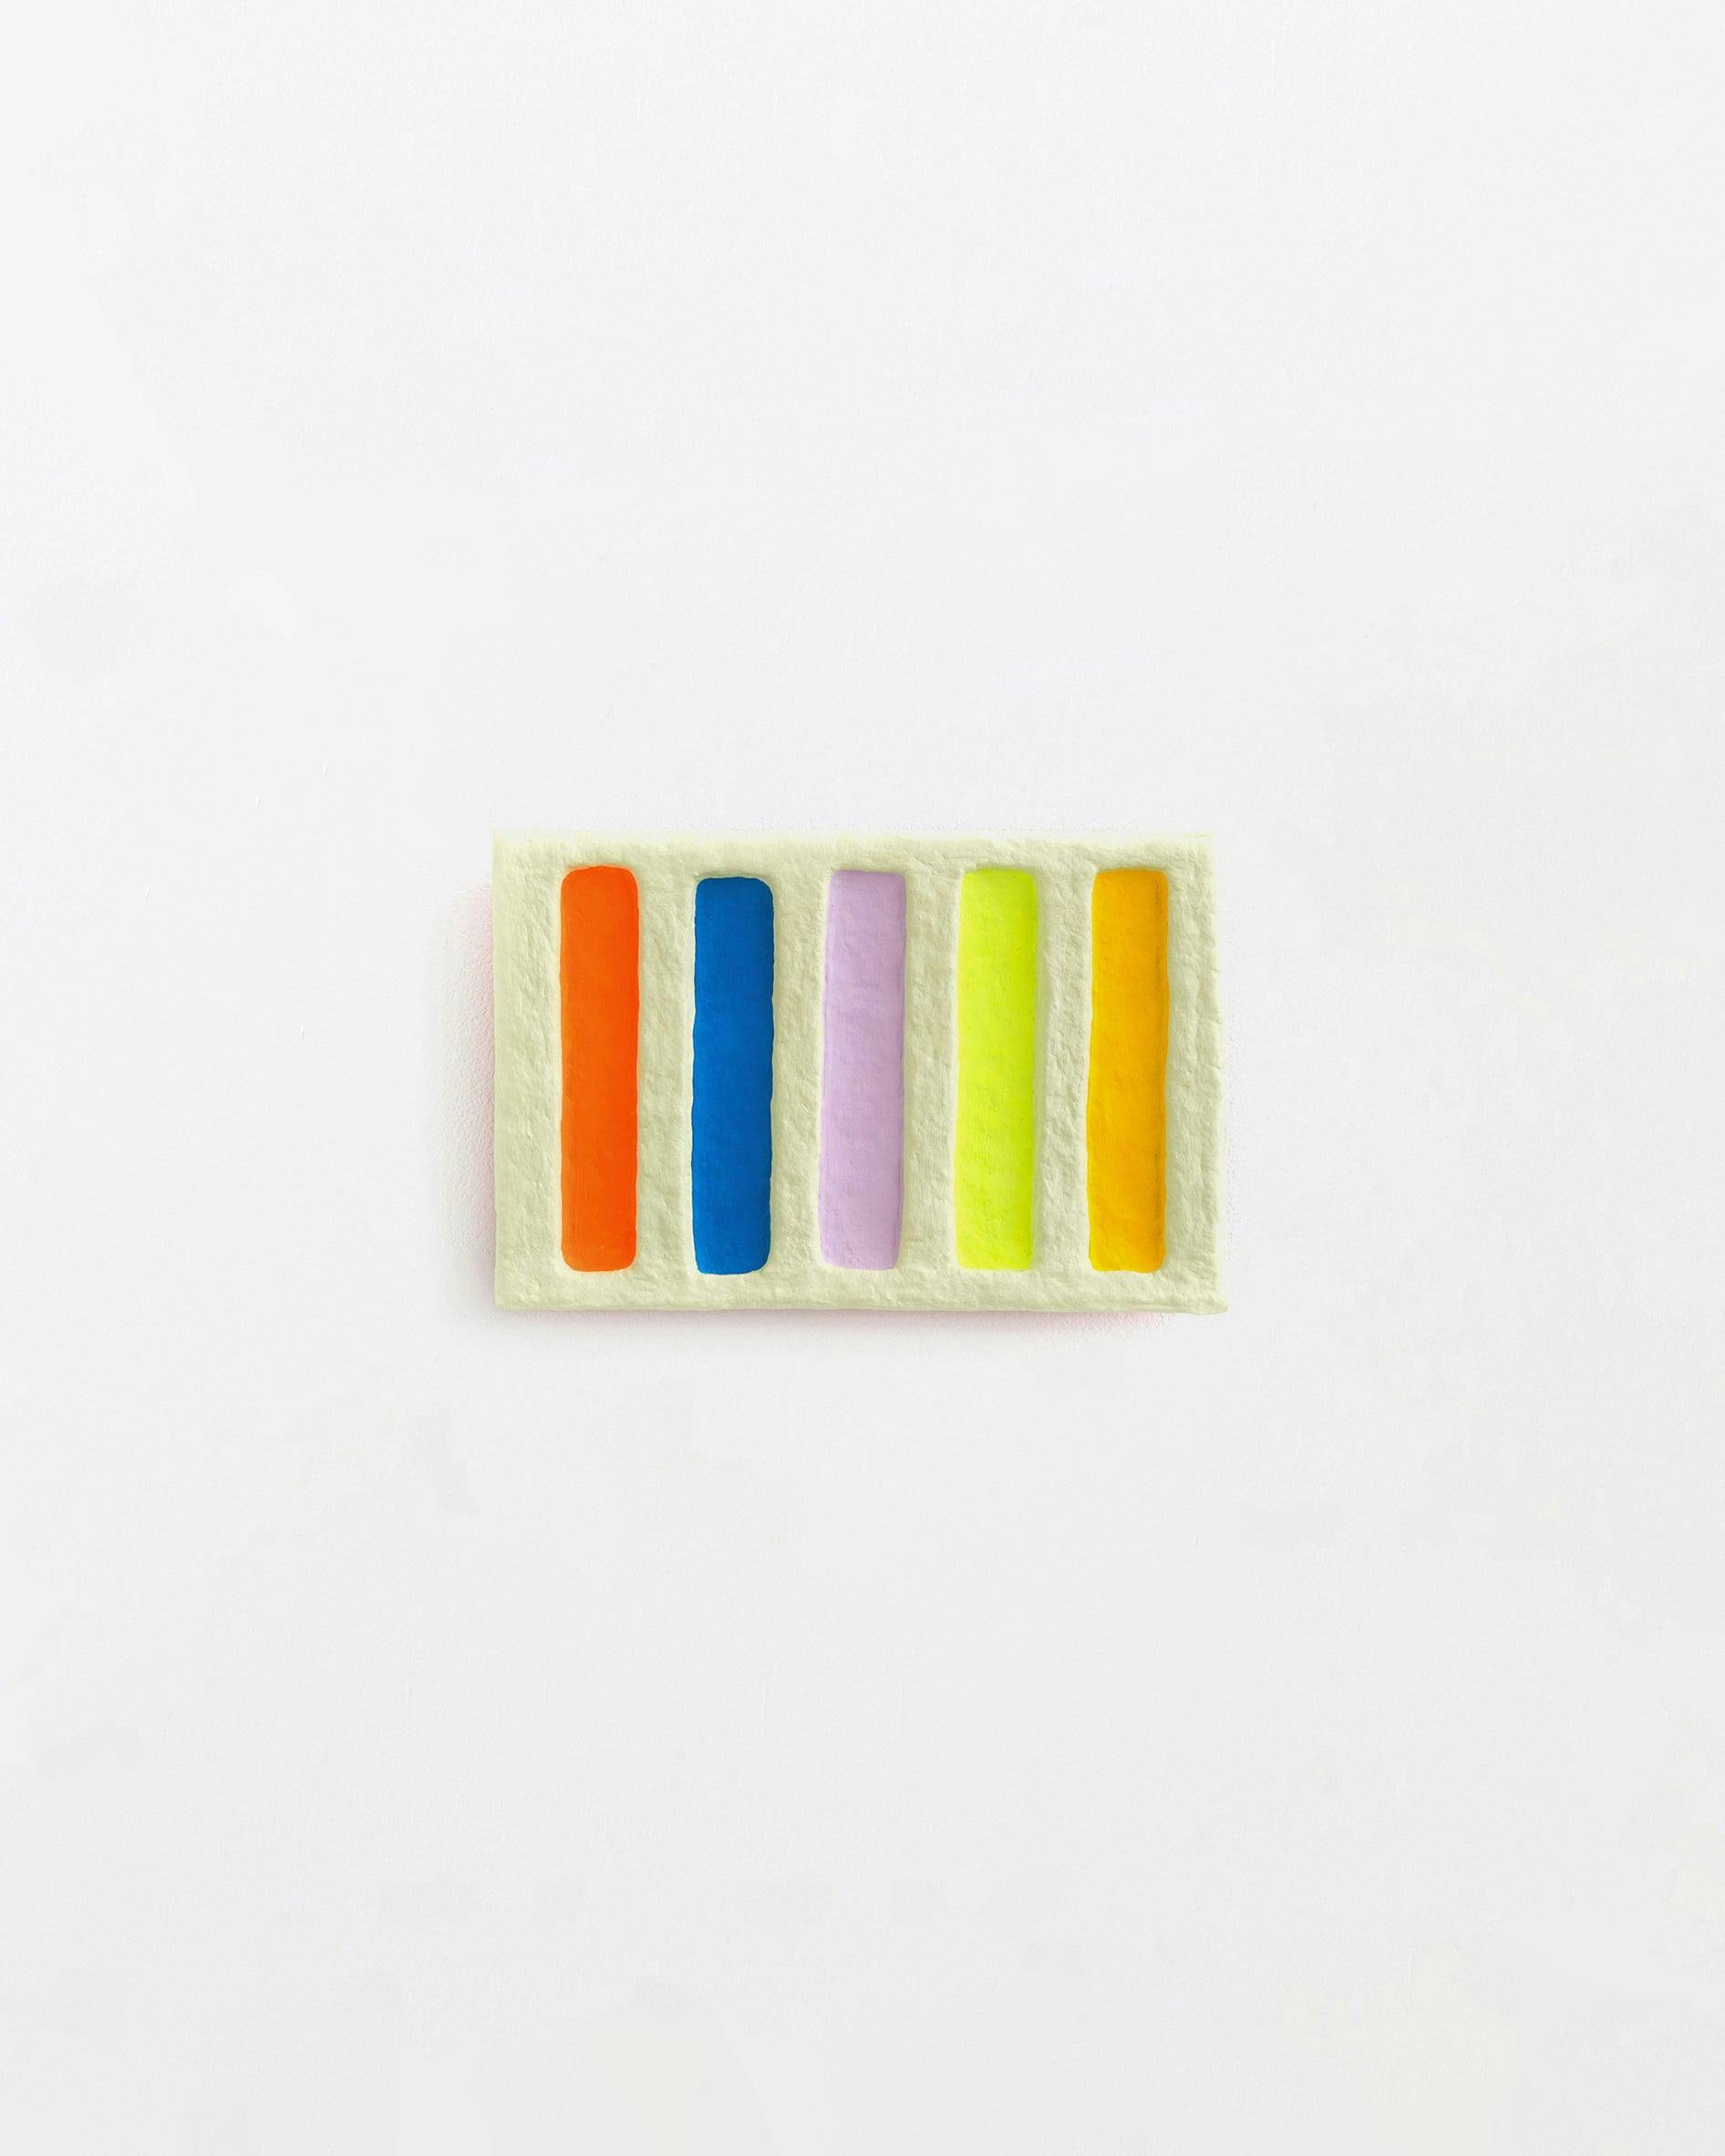 Painting by Adam Frezza & Terri Chiao (CHIAOZZA) titled "5 Bars in a Pale Lime Block".